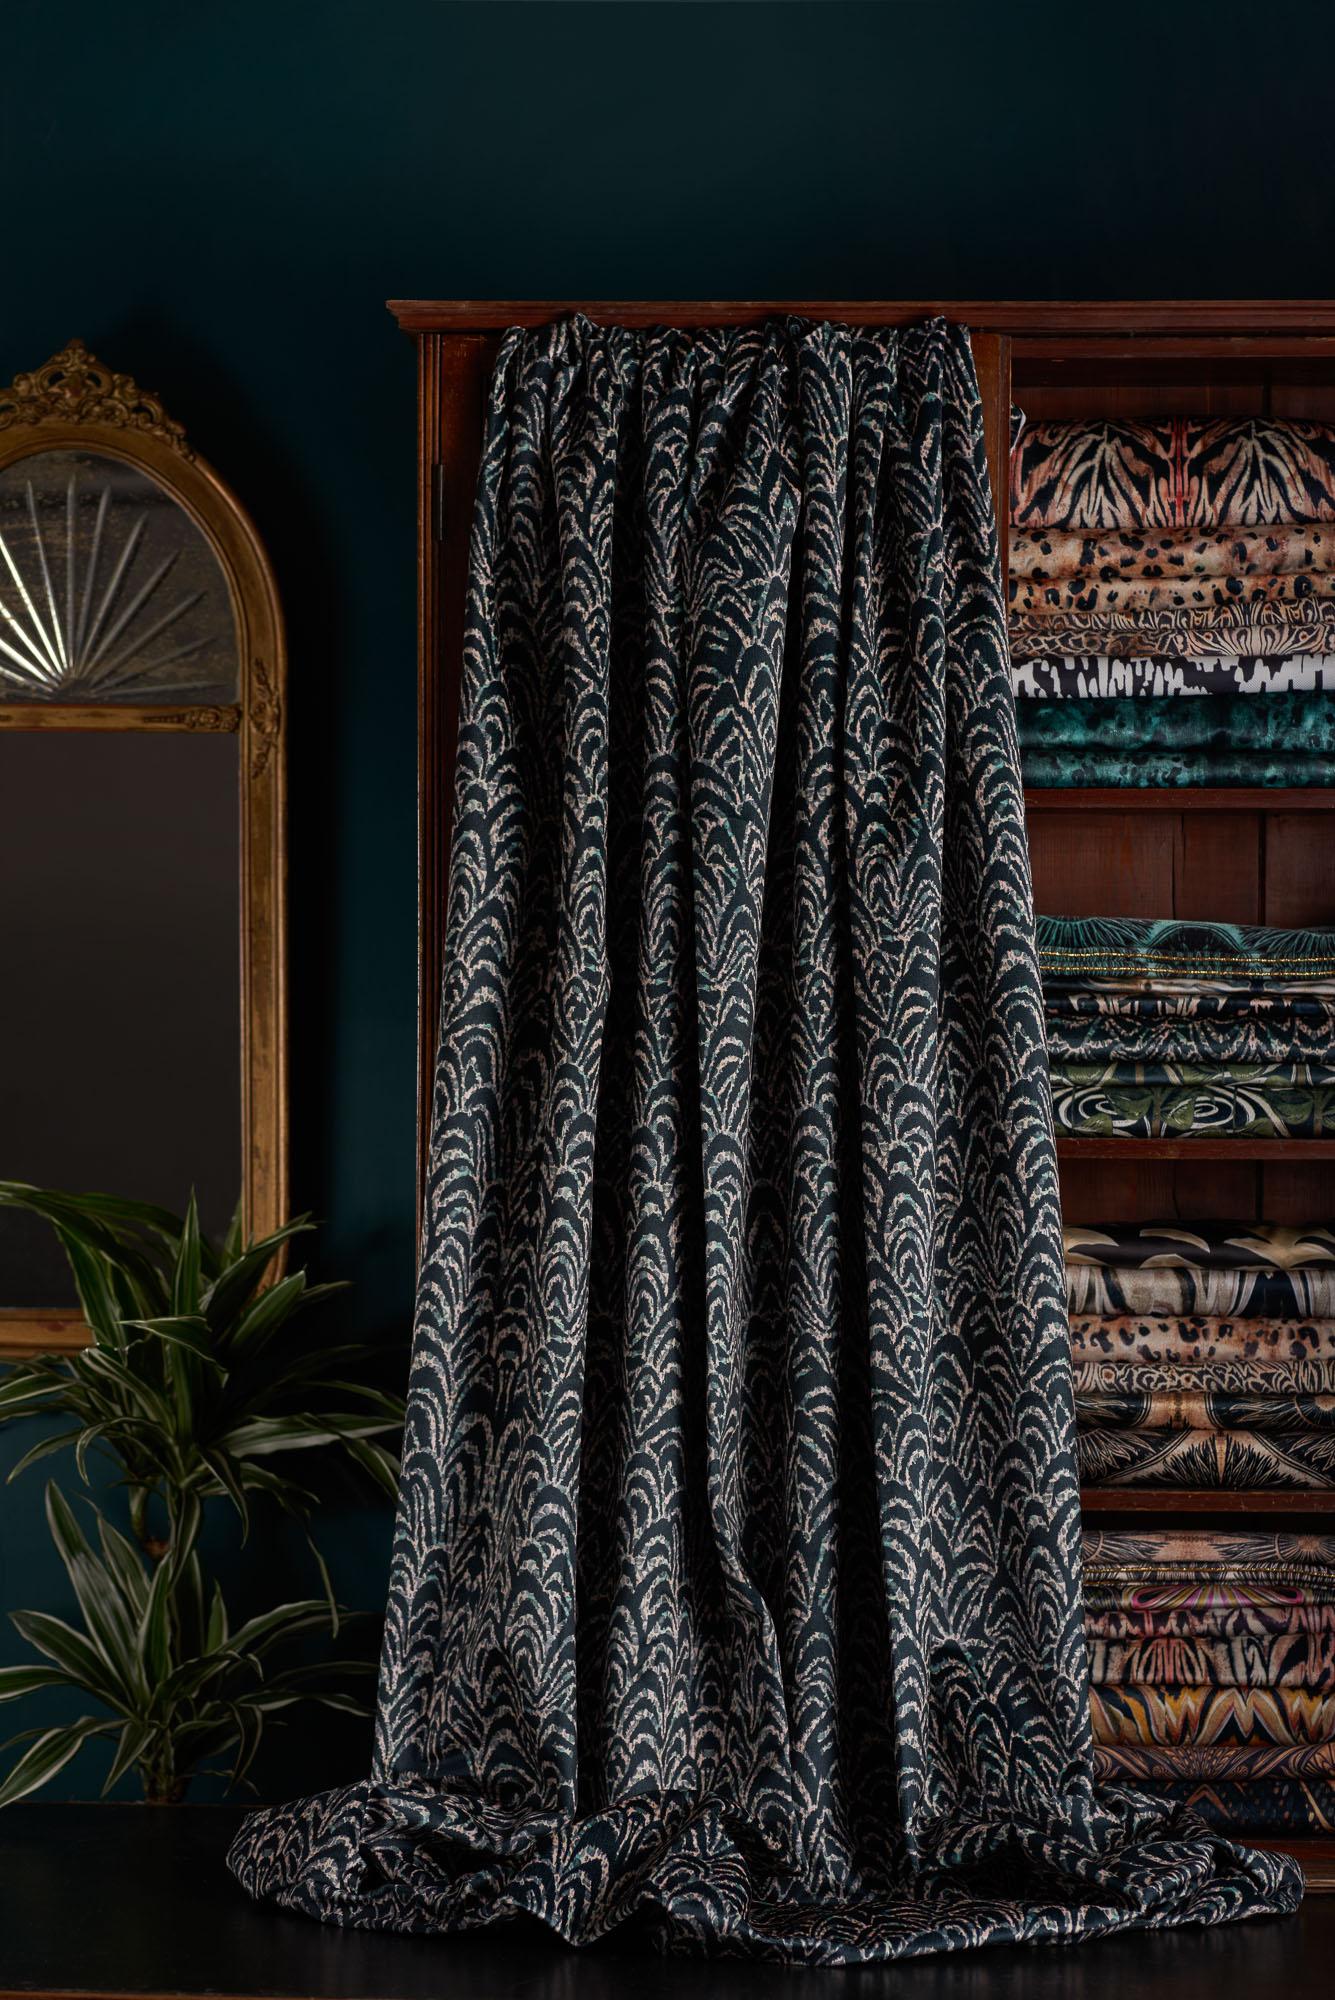 Josephine has a winning combination of vintage glamour and modern edge. Akin to our bestselling Siouxsie design, the tones of black petrol blush and nude are similar but this is a tighter, more art deco inspired print.

This velvet is midweight,